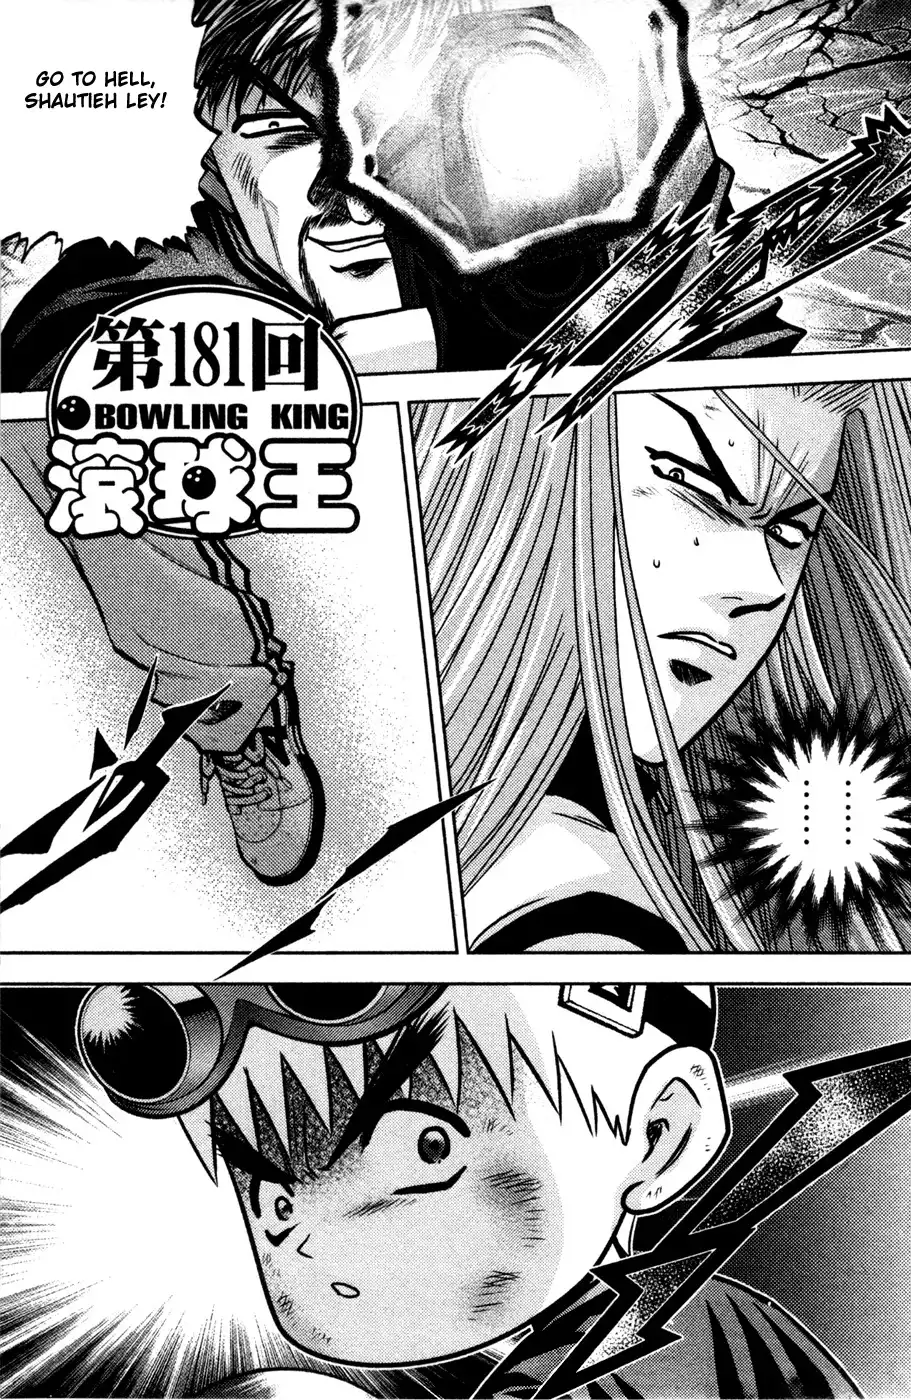 Bowling King Chapter 181